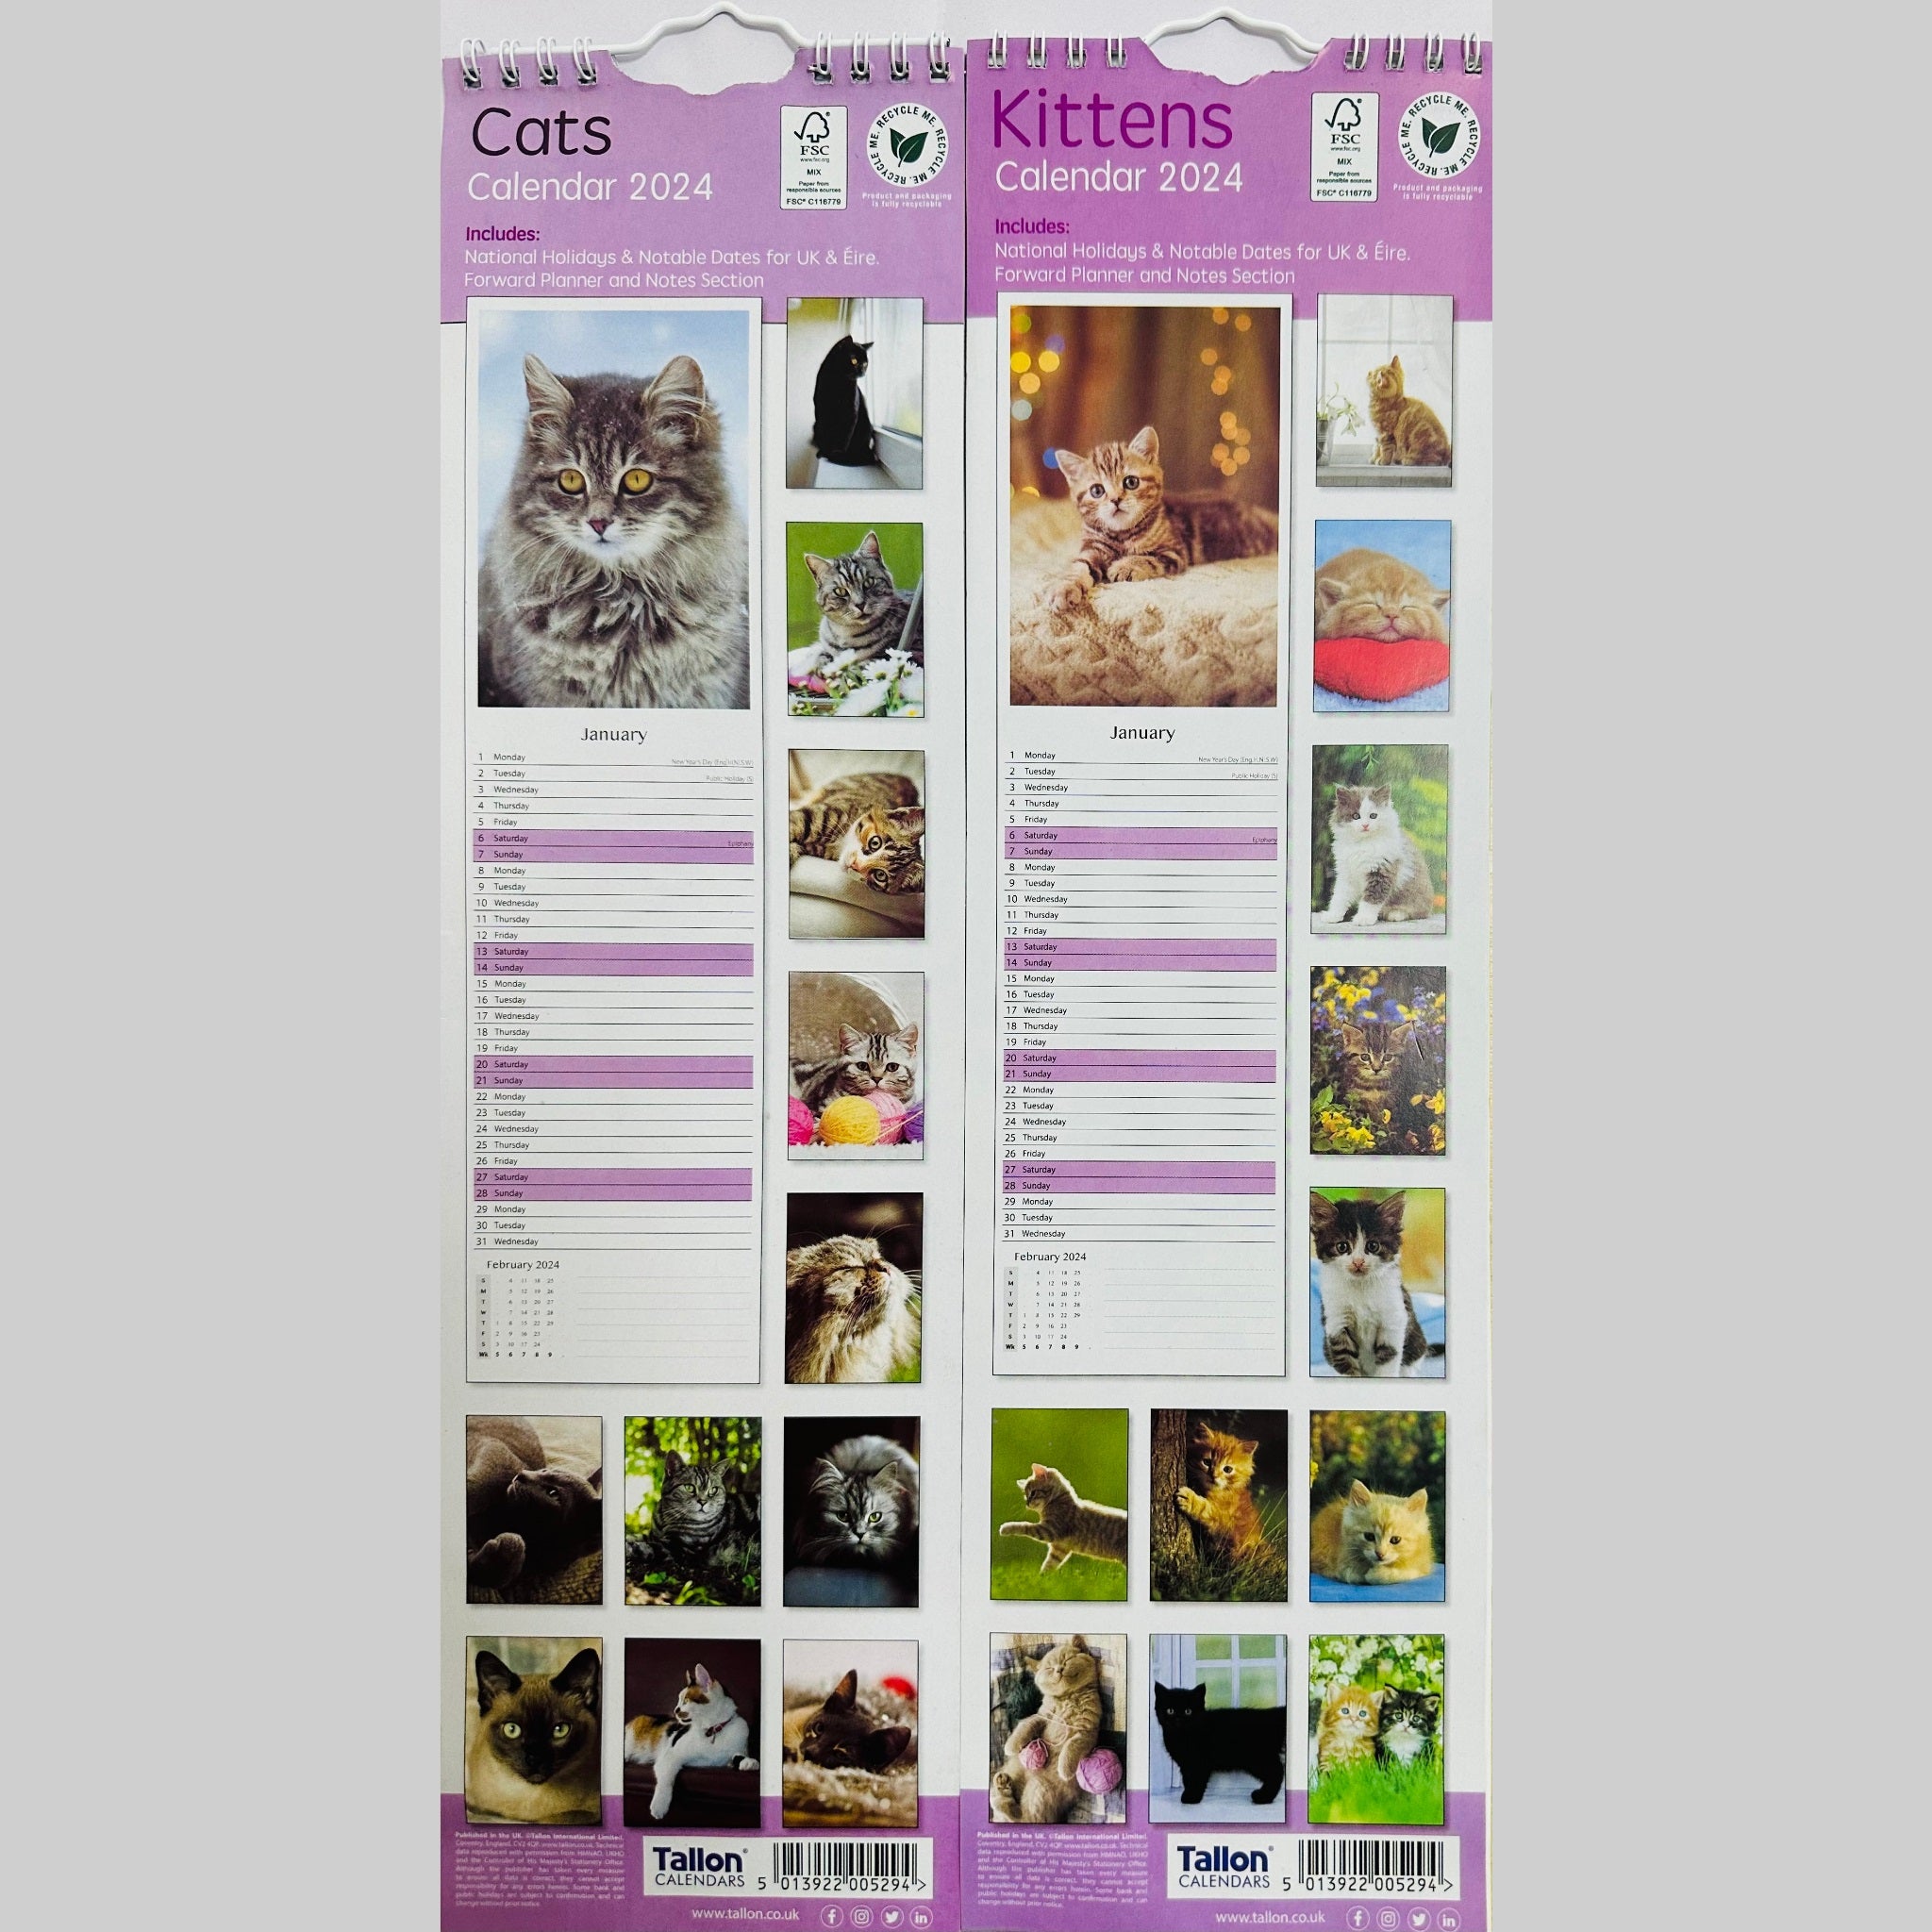 Beclen Harp Super Slim Month to View Spiral Bound Hanging Wall Calendar Home Office 2024 Dogs, Puppies, Kittens, Cats, Wildlife, Flowers, Scenes, Gardens